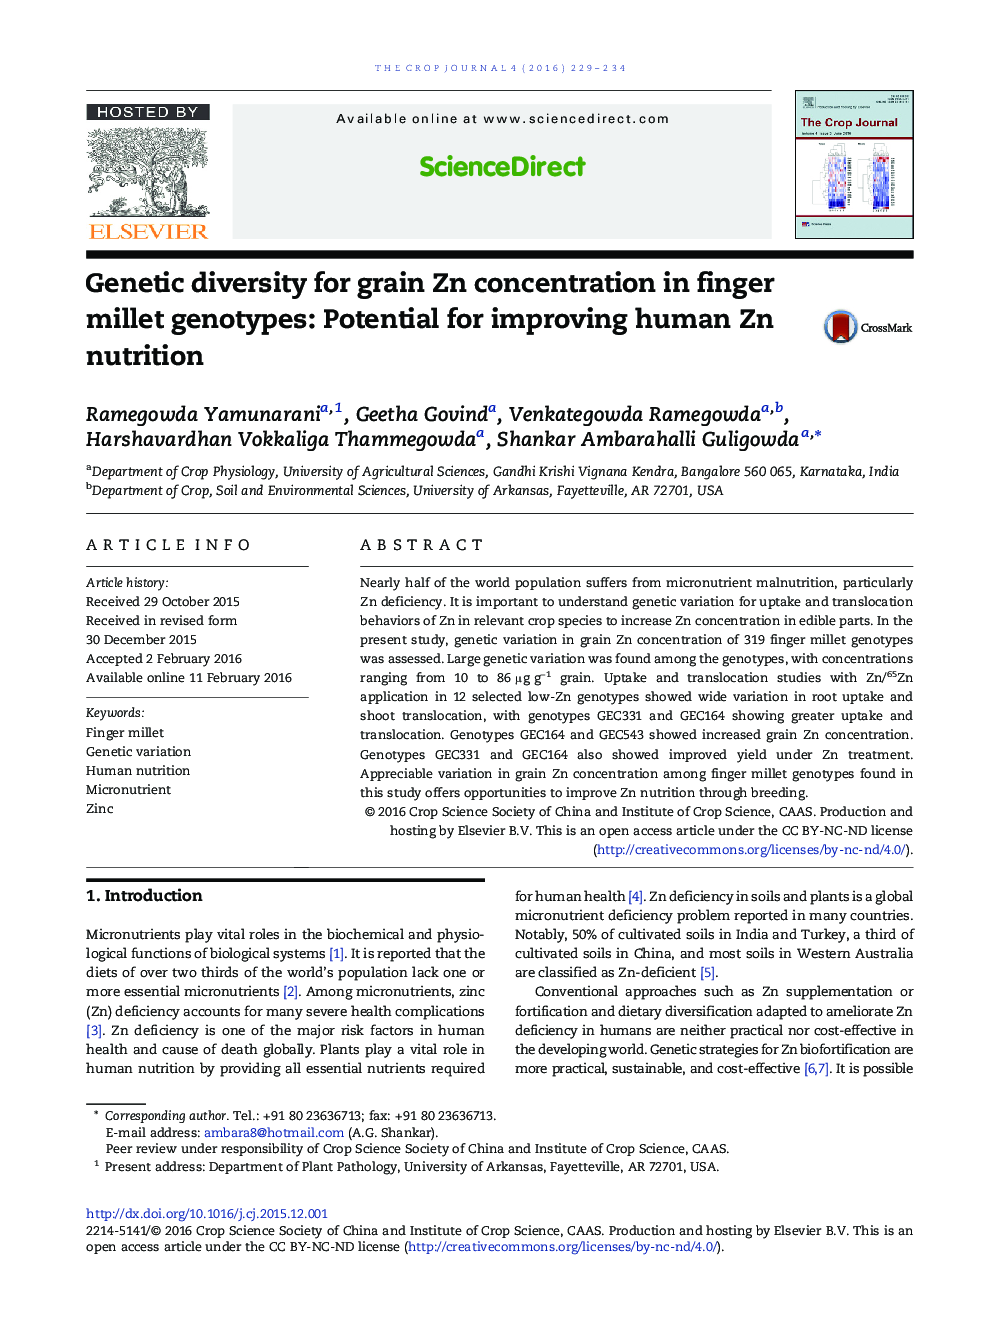 Genetic diversity for grain Zn concentration in finger millet genotypes: Potential for improving human Zn nutrition 